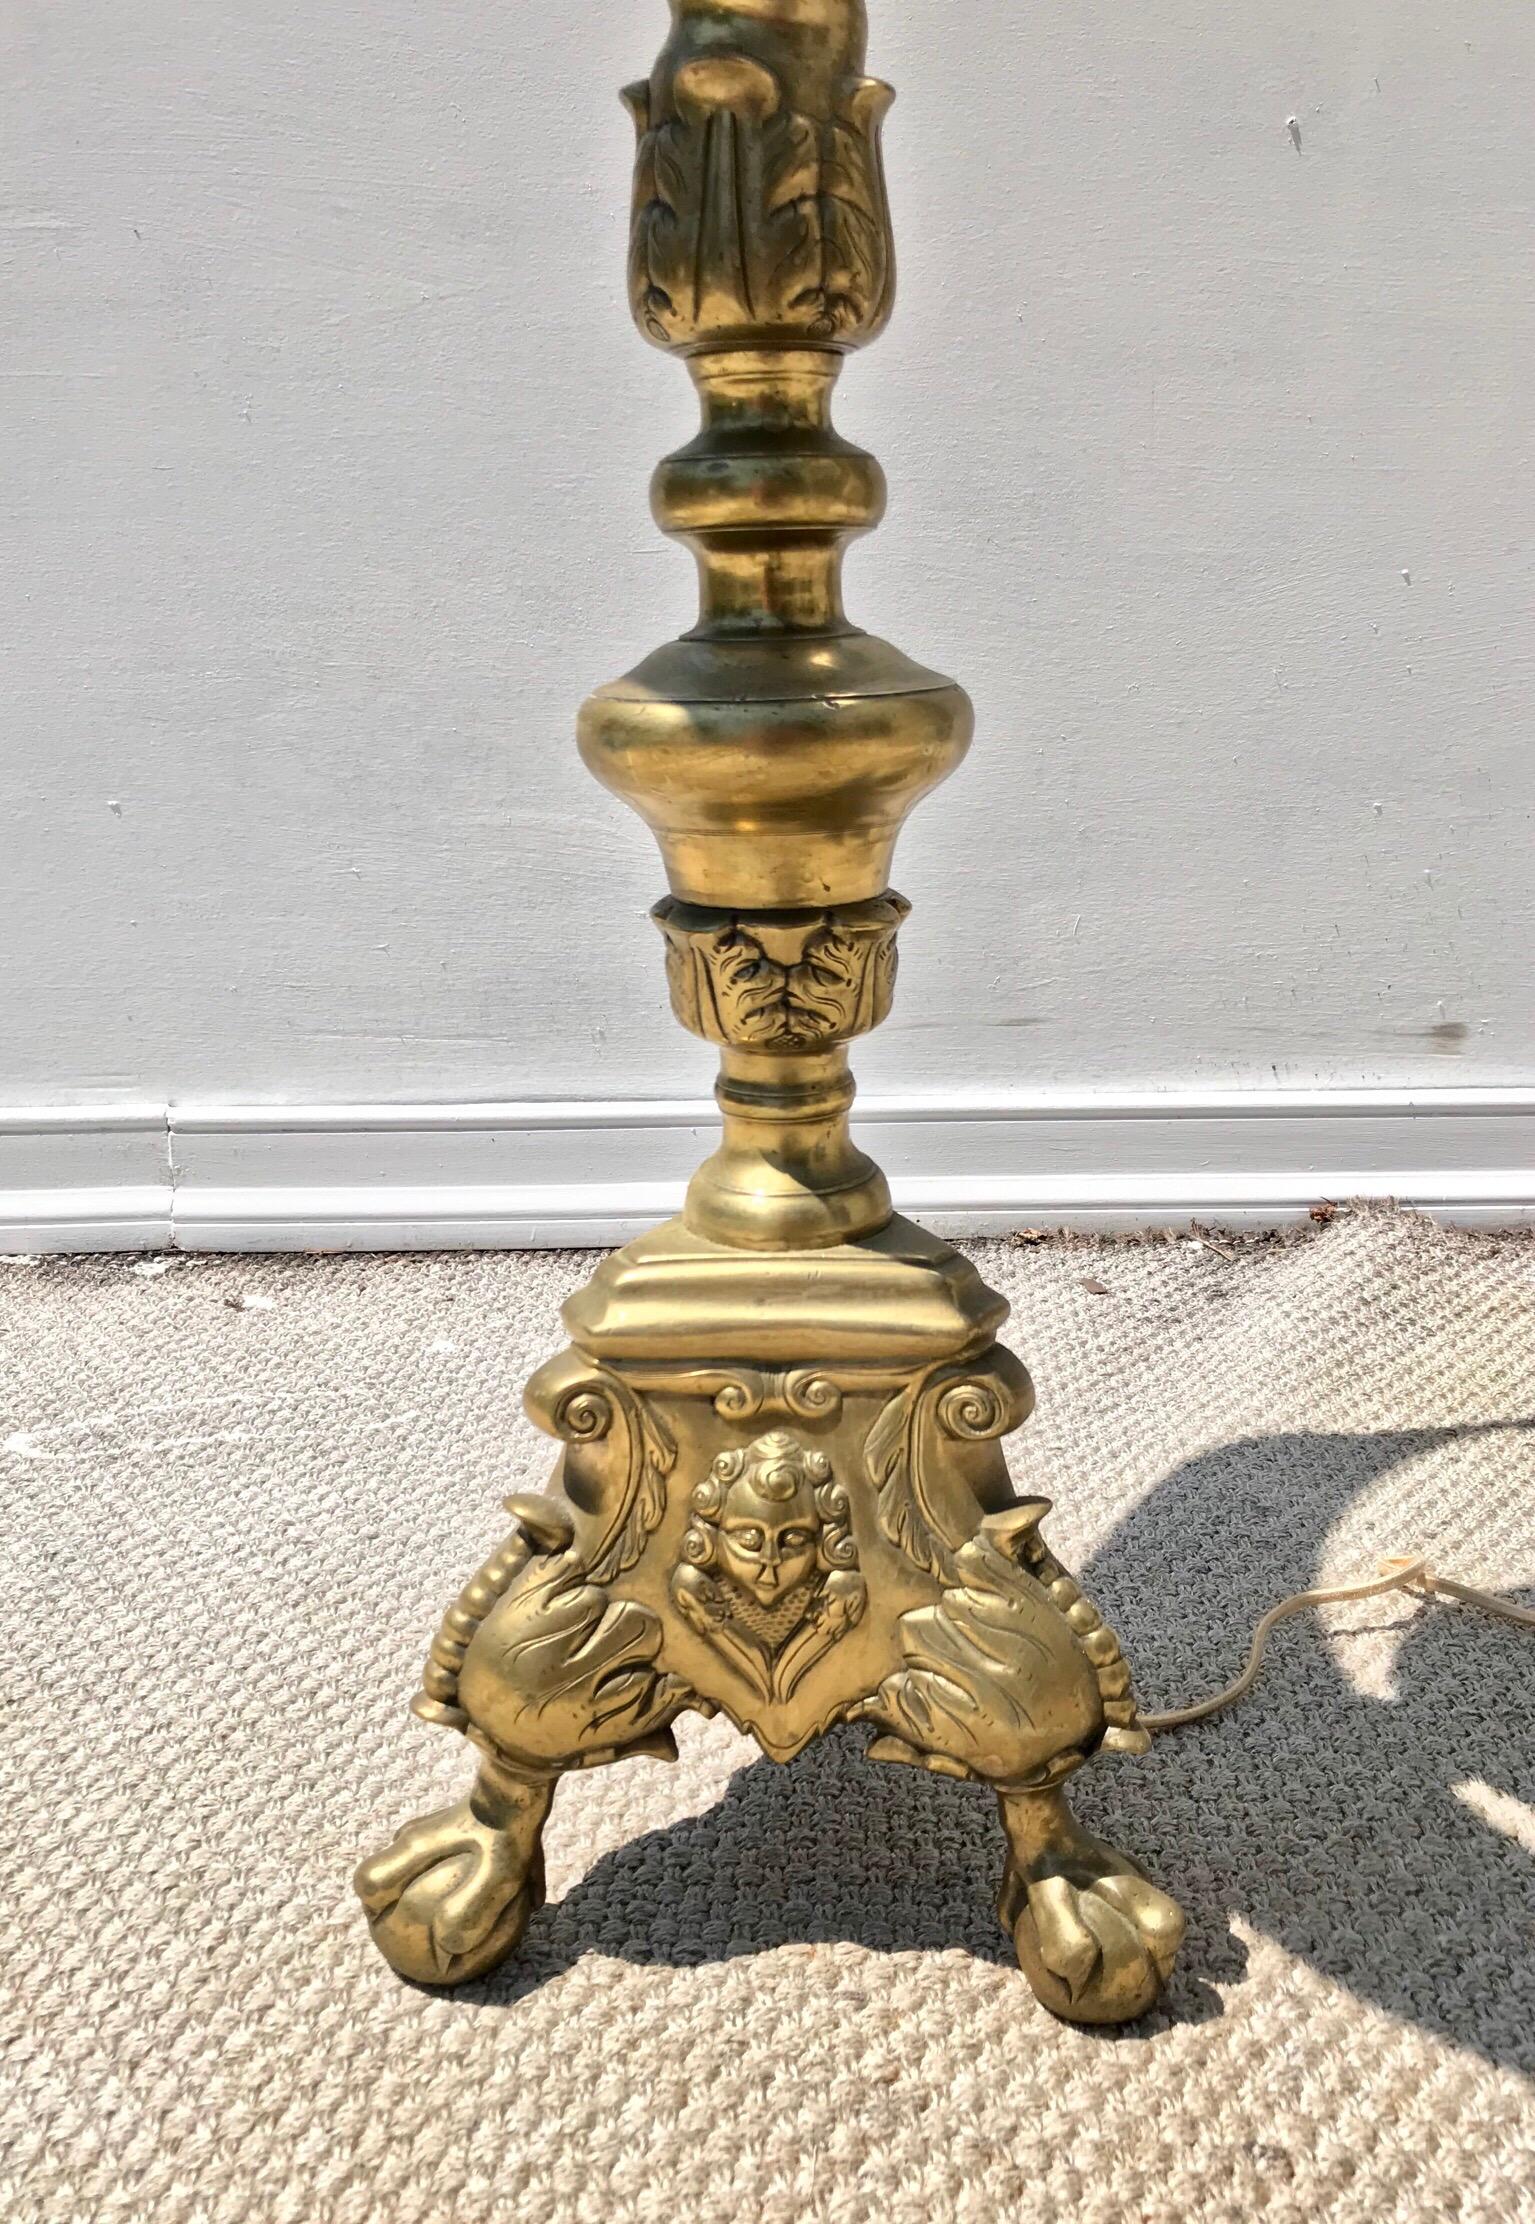 A fine and large-scale Baroque alter stick lamp of brass. Recently rewired and fitted with a double socket cluster in a patinated brass. The light sells and ships without the pictured shade.